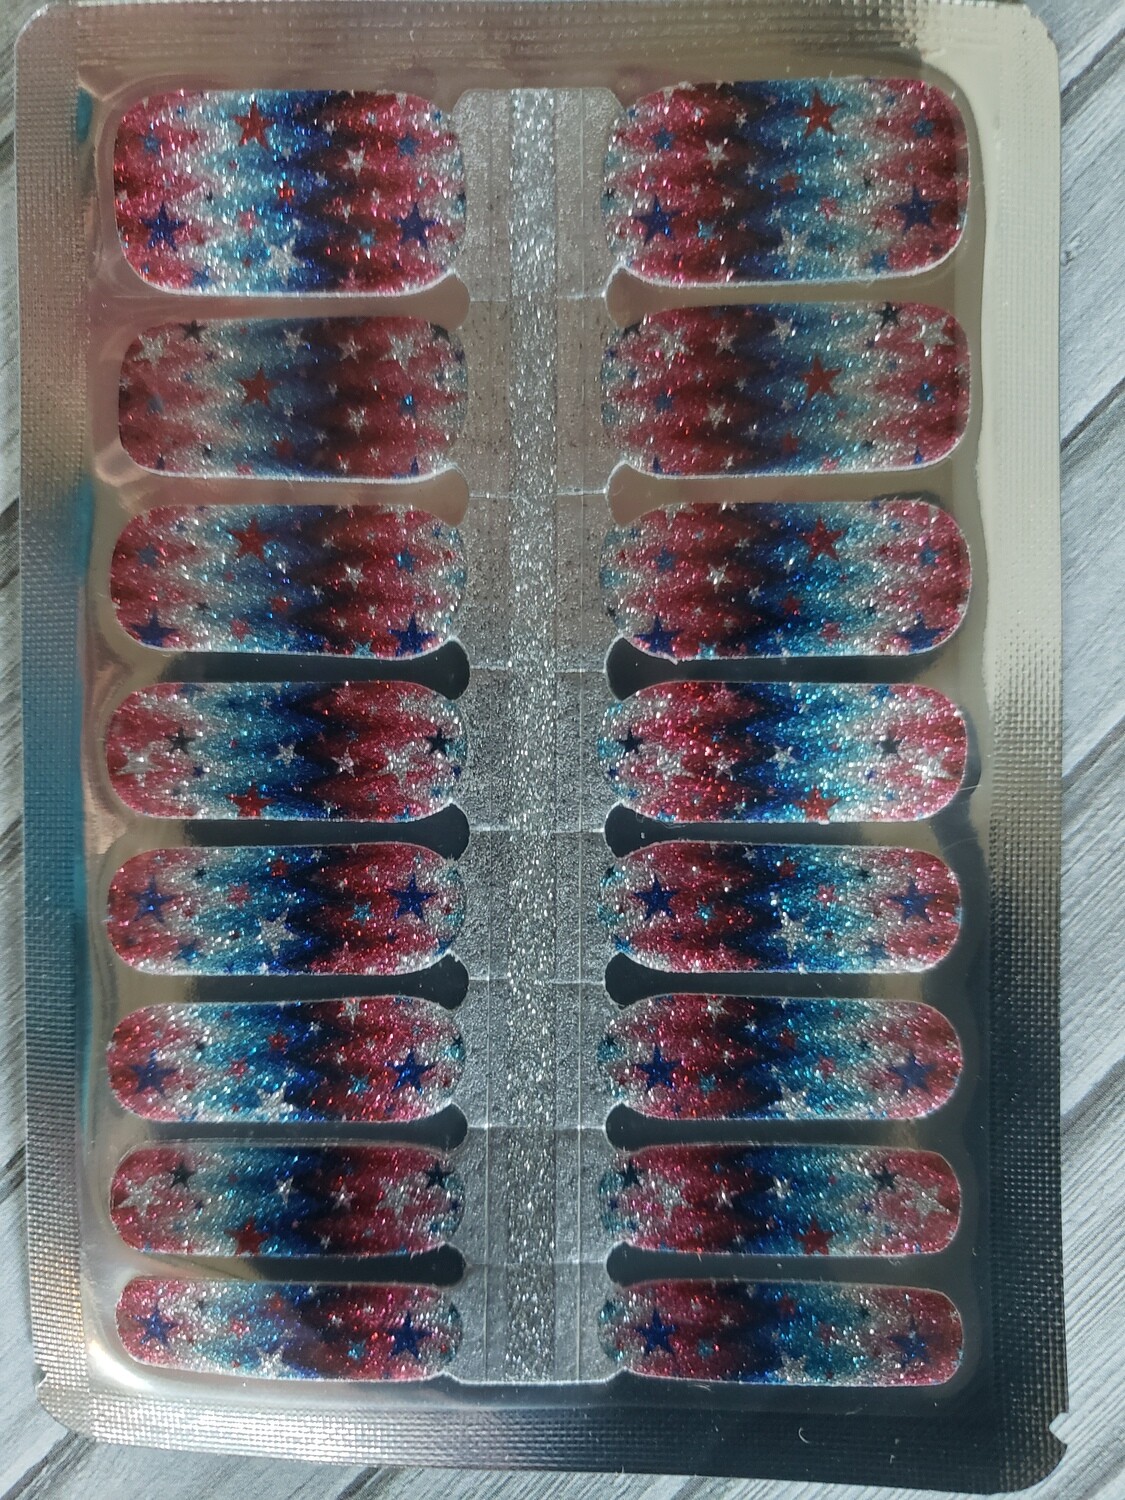 500- American Glitter
(Red, White and Blue Stars)